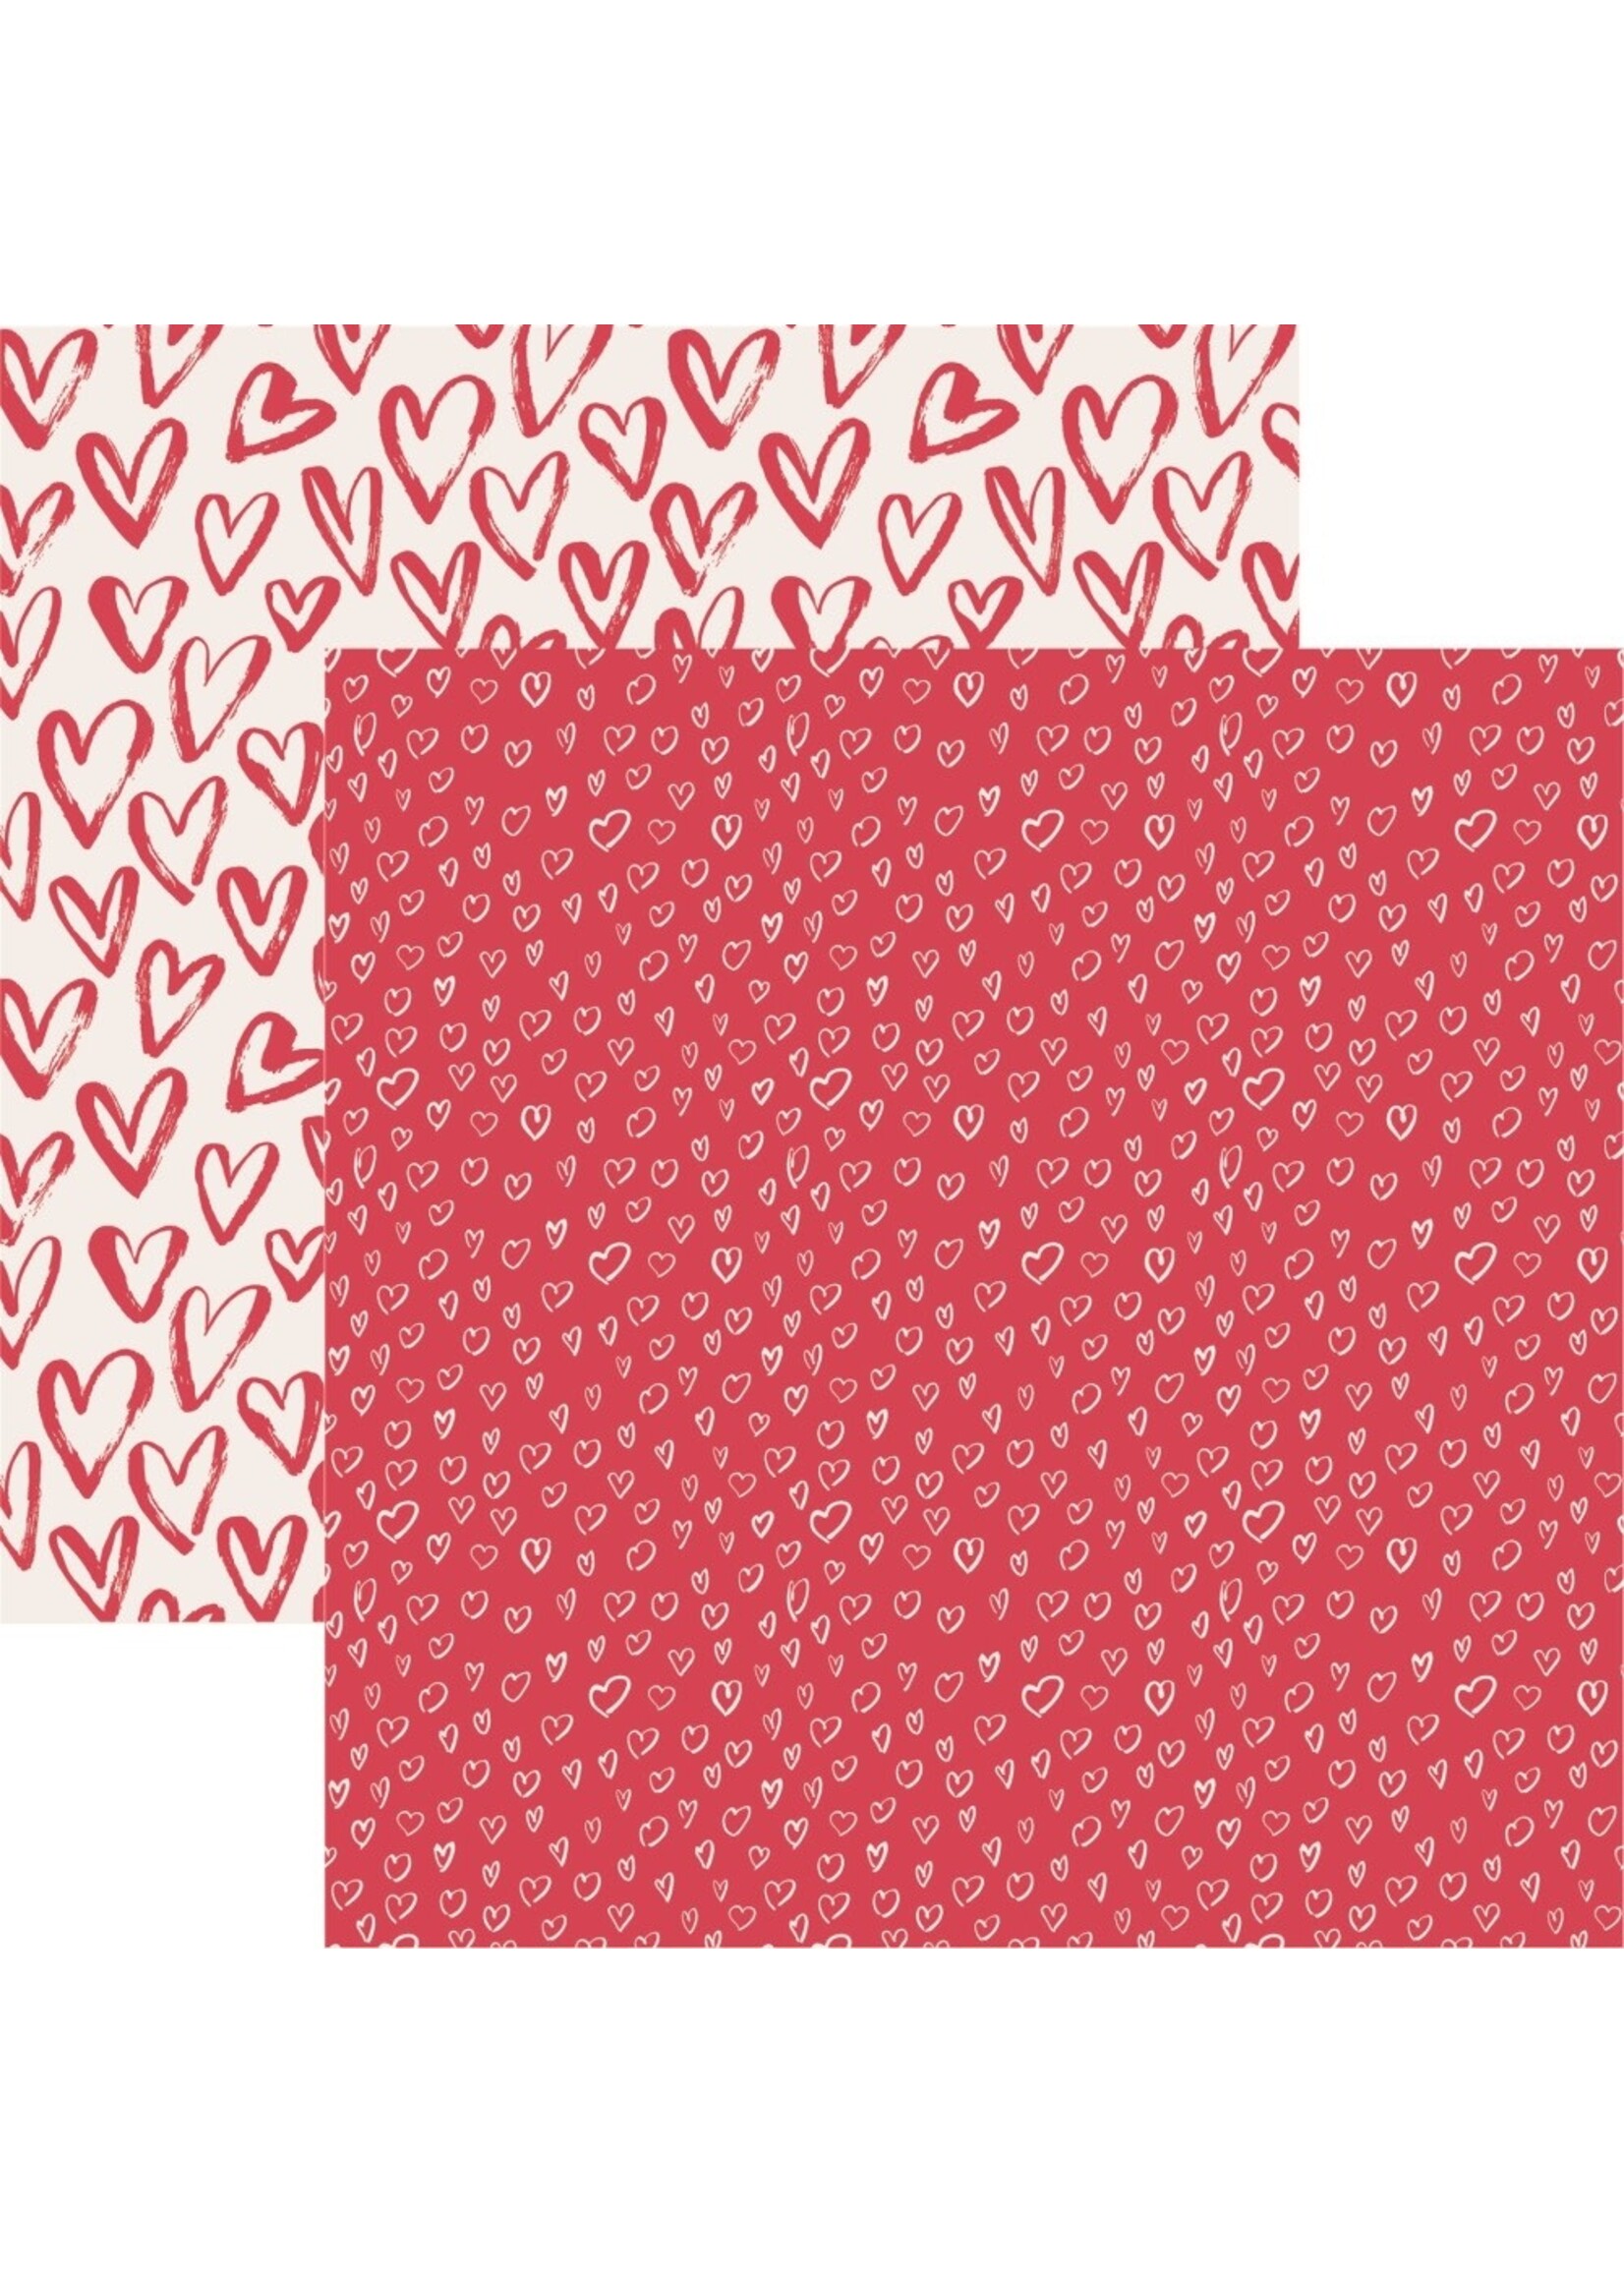 Reminisce 12x12 Patterned Paper, Be My Valentine - I Love You